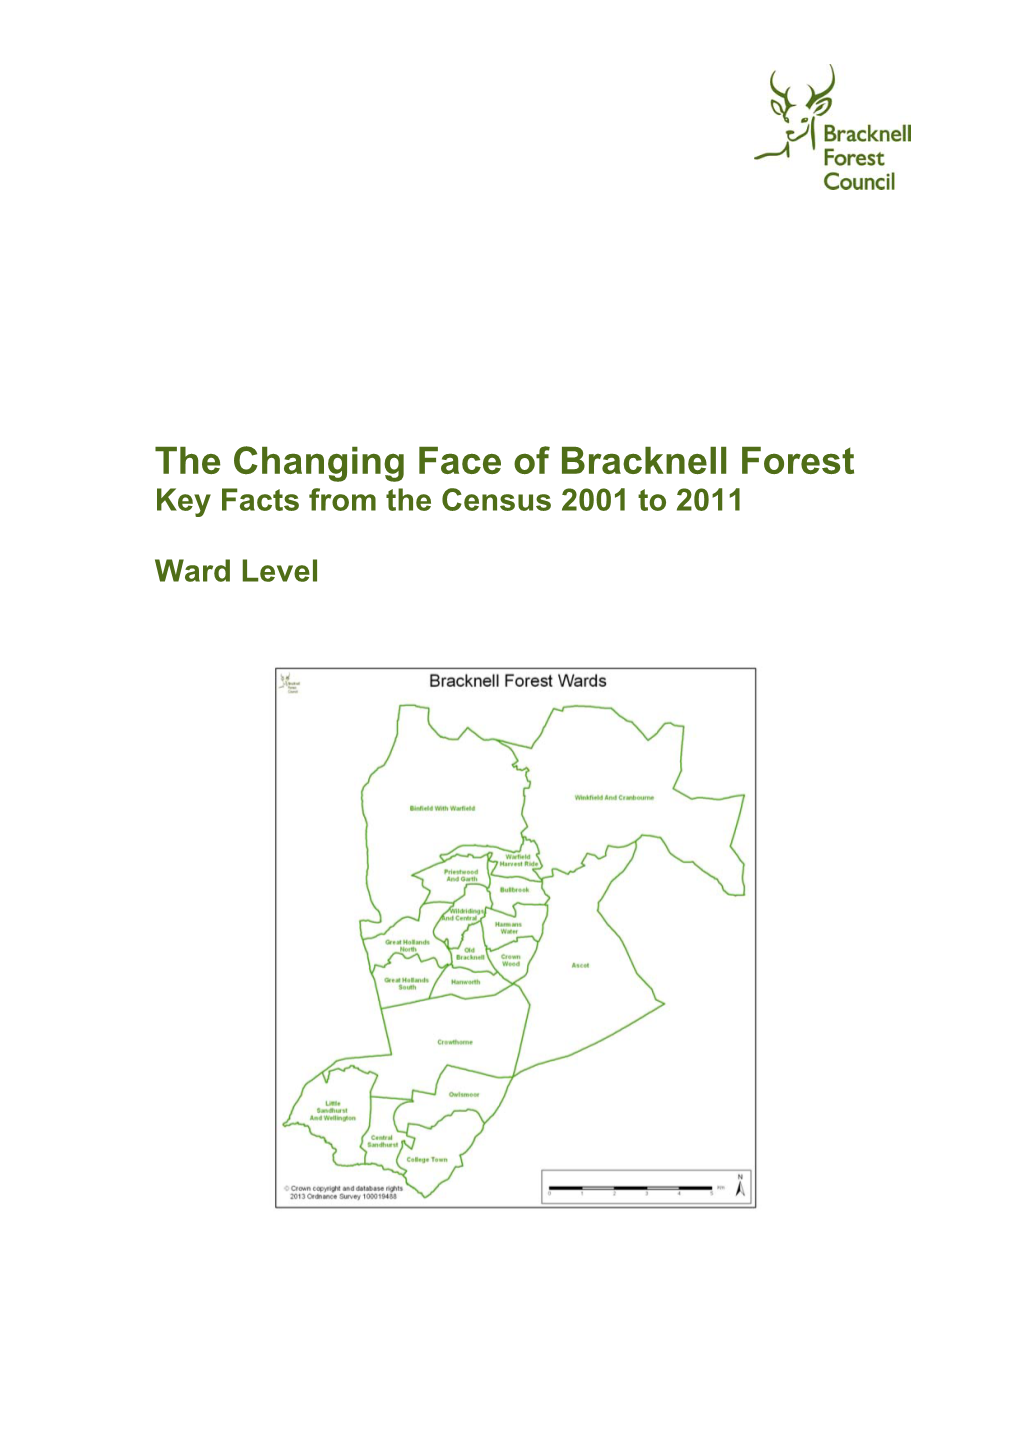 The Changing Face of Bracknell Forest Key Facts from the Census 2001 to 2011